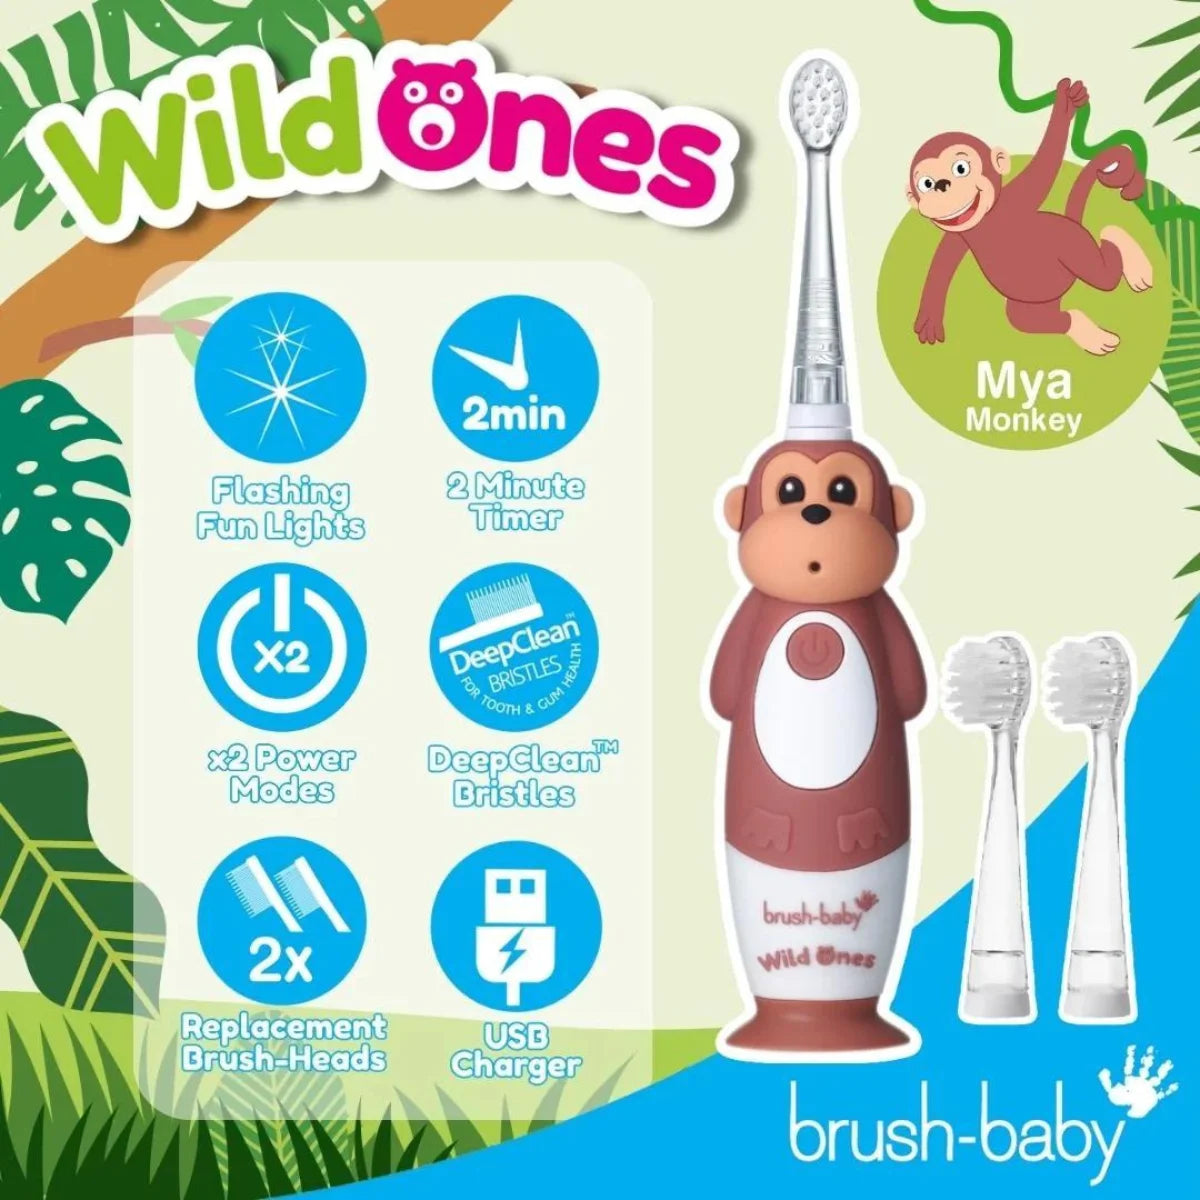 WildOnes Monkey Rechargeable Electric Toothbrush for Kids